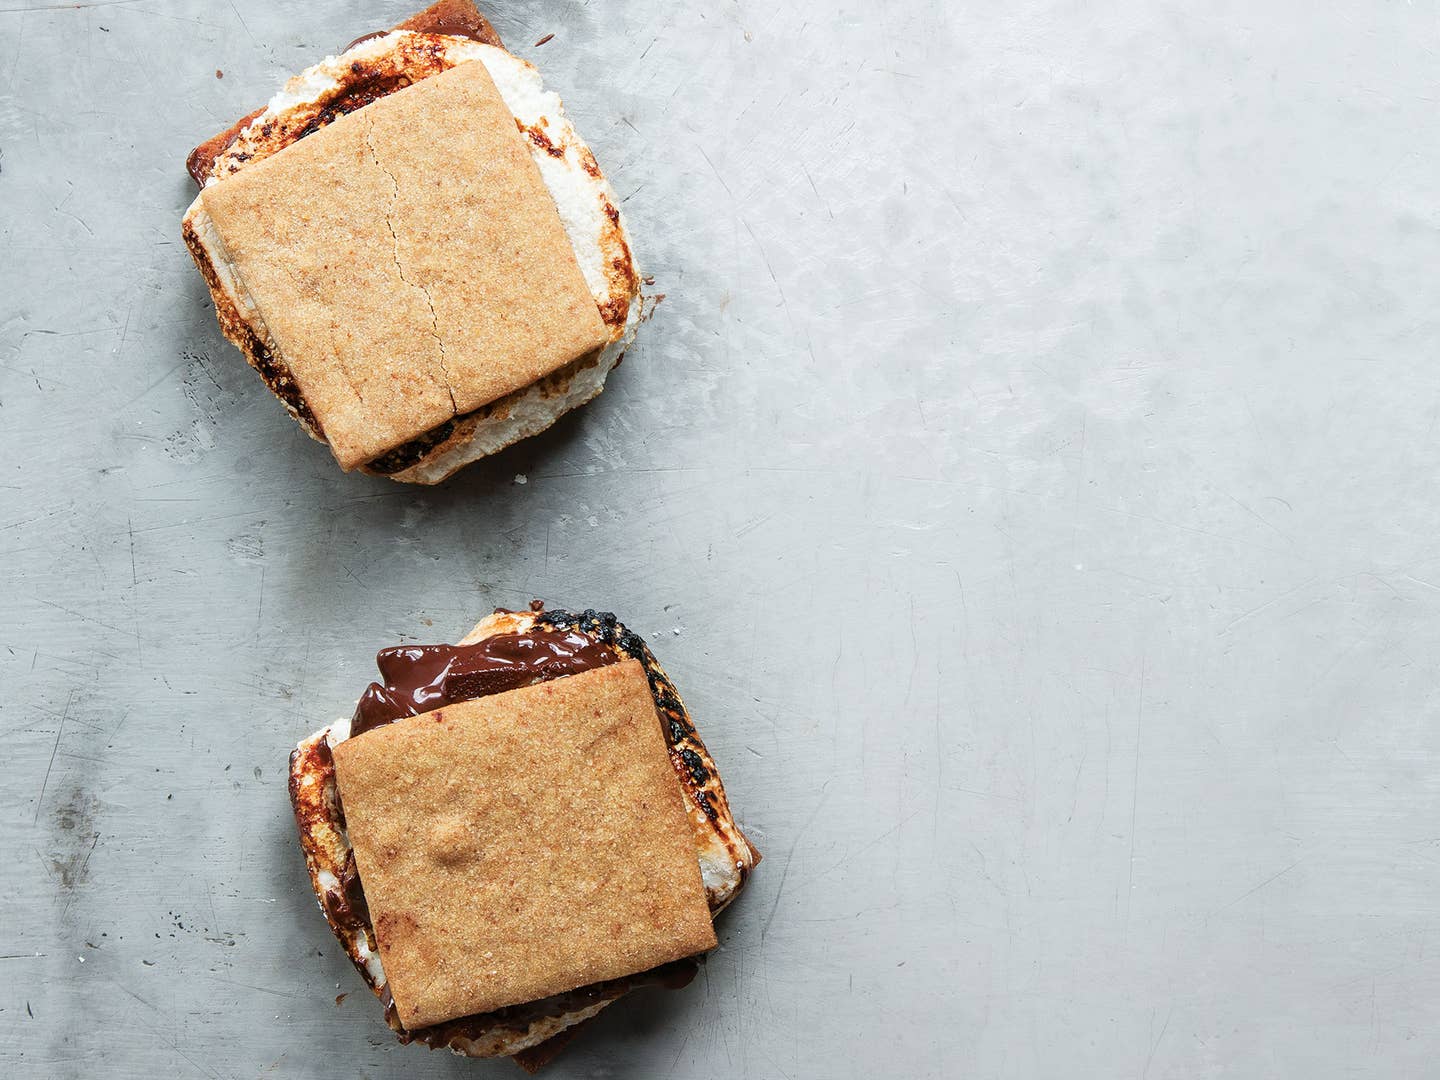 Smoked Almond S’Mores with Whiskey Marshmallows